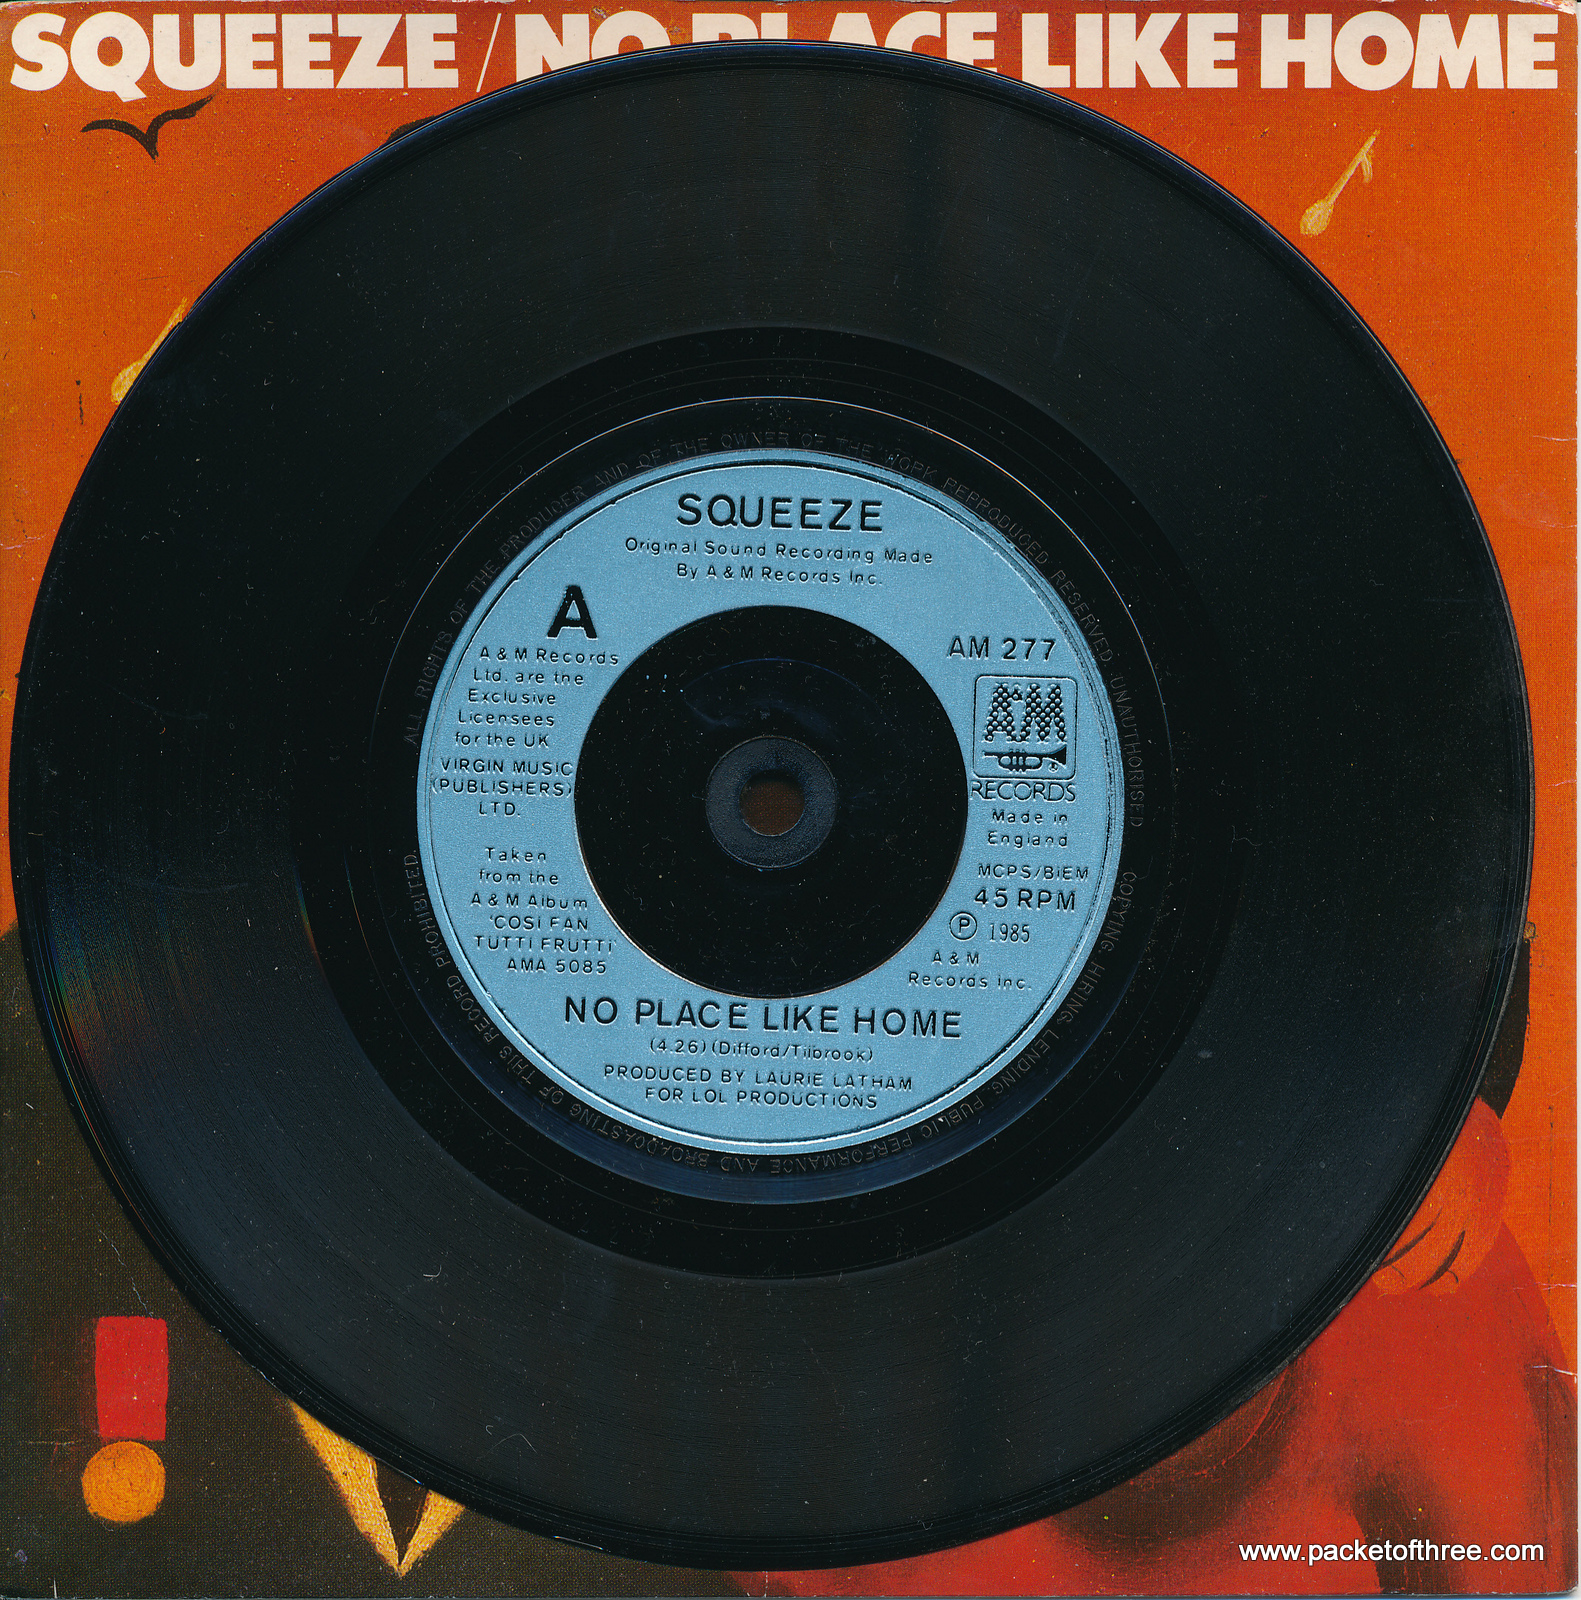 Squeeze - No Place Like Home - UK - 7" - picture sleeve